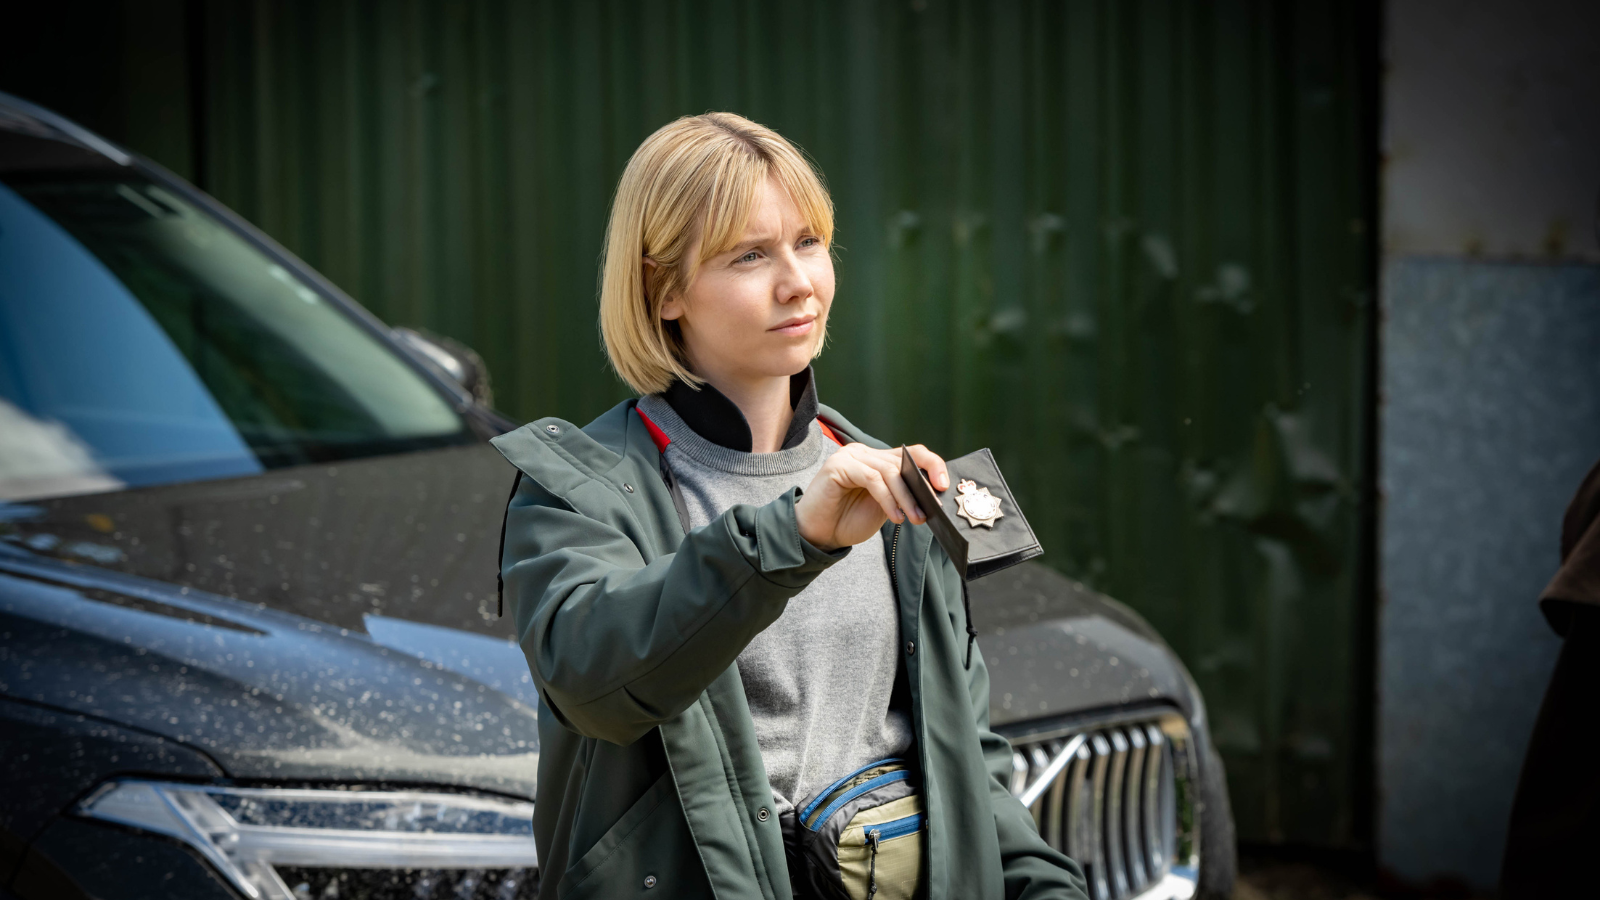 Karen Pirrie holding her police badge standing in front of a car